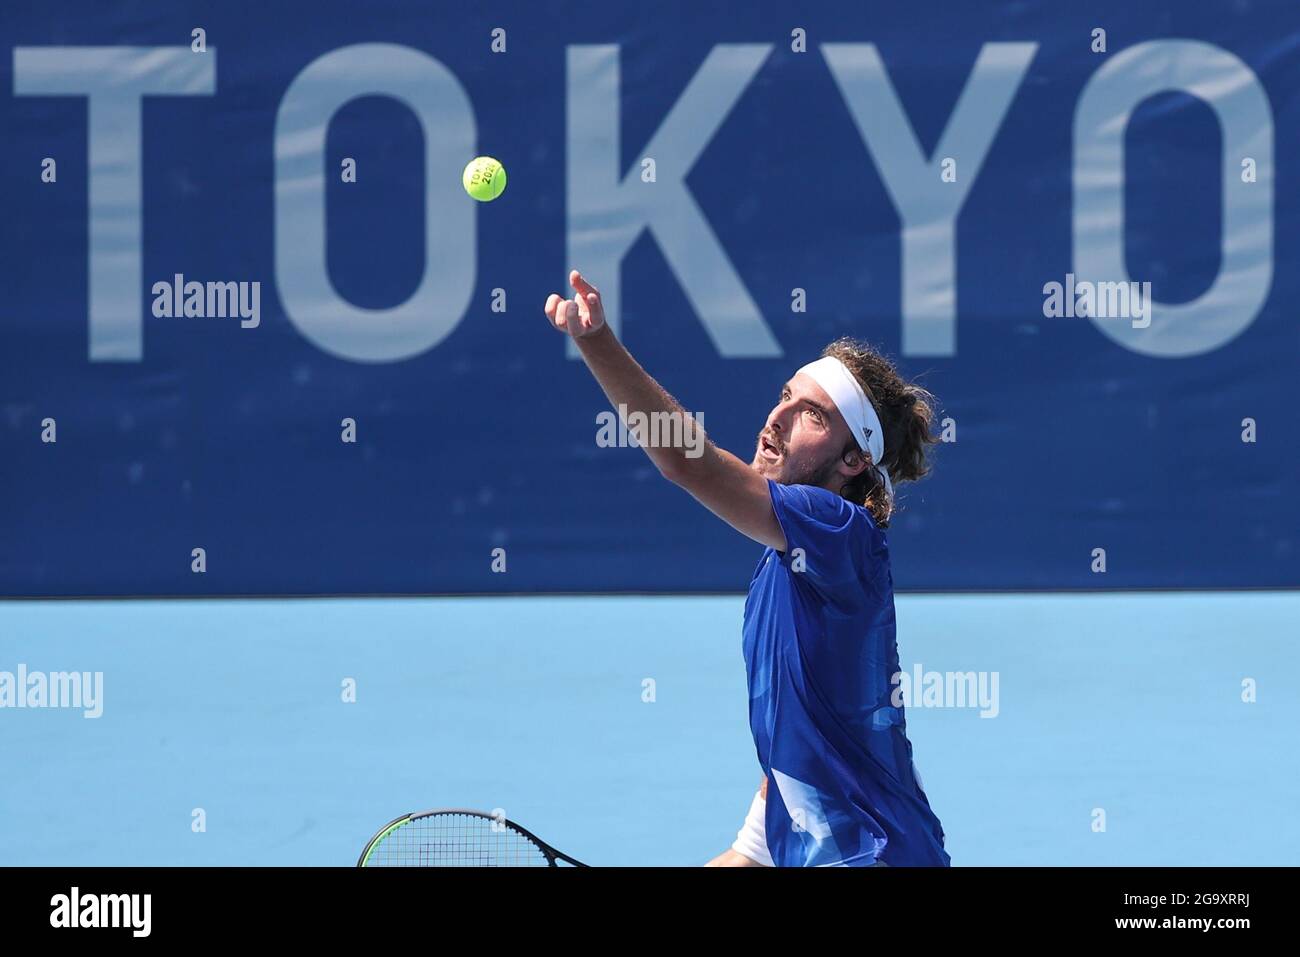 Tokyo, Japan. 28th July, 2021. Stefanos Tsitsipas of Greece serves during tennis Men's Singles Third Round match against Ugo Humbert of France at the Tokyo 2020 Olympic Games in Tokyo, Japan, on July 28, 2021. Credit: Zheng Huansong/Xinhua/Alamy Live News Stock Photo